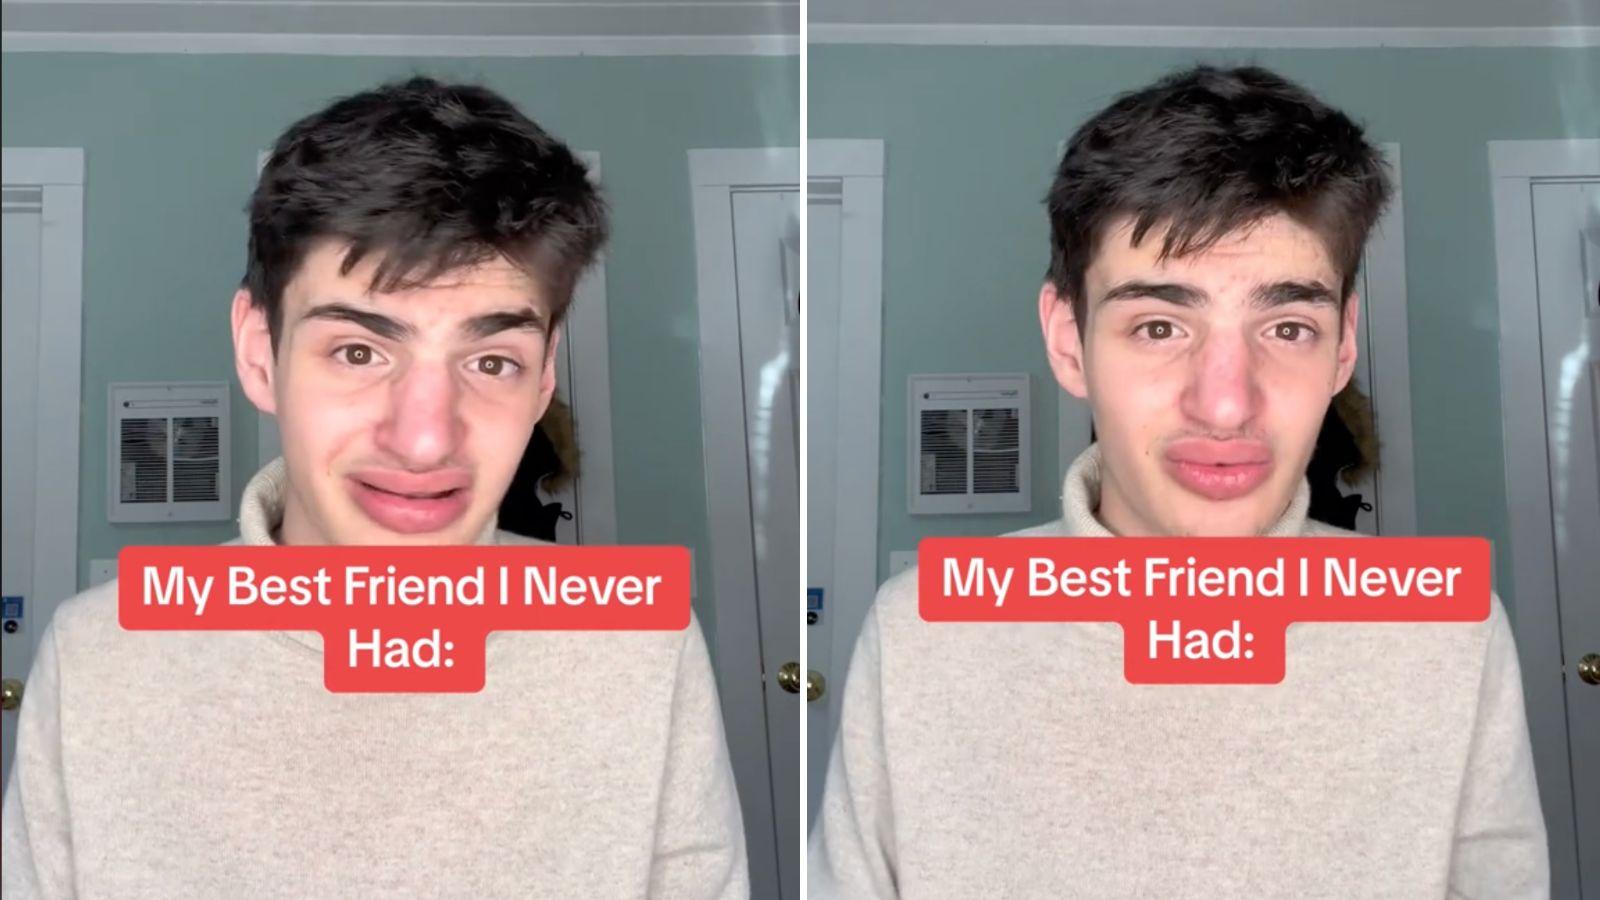 Teen finds out his childhood best friend was a paid actor